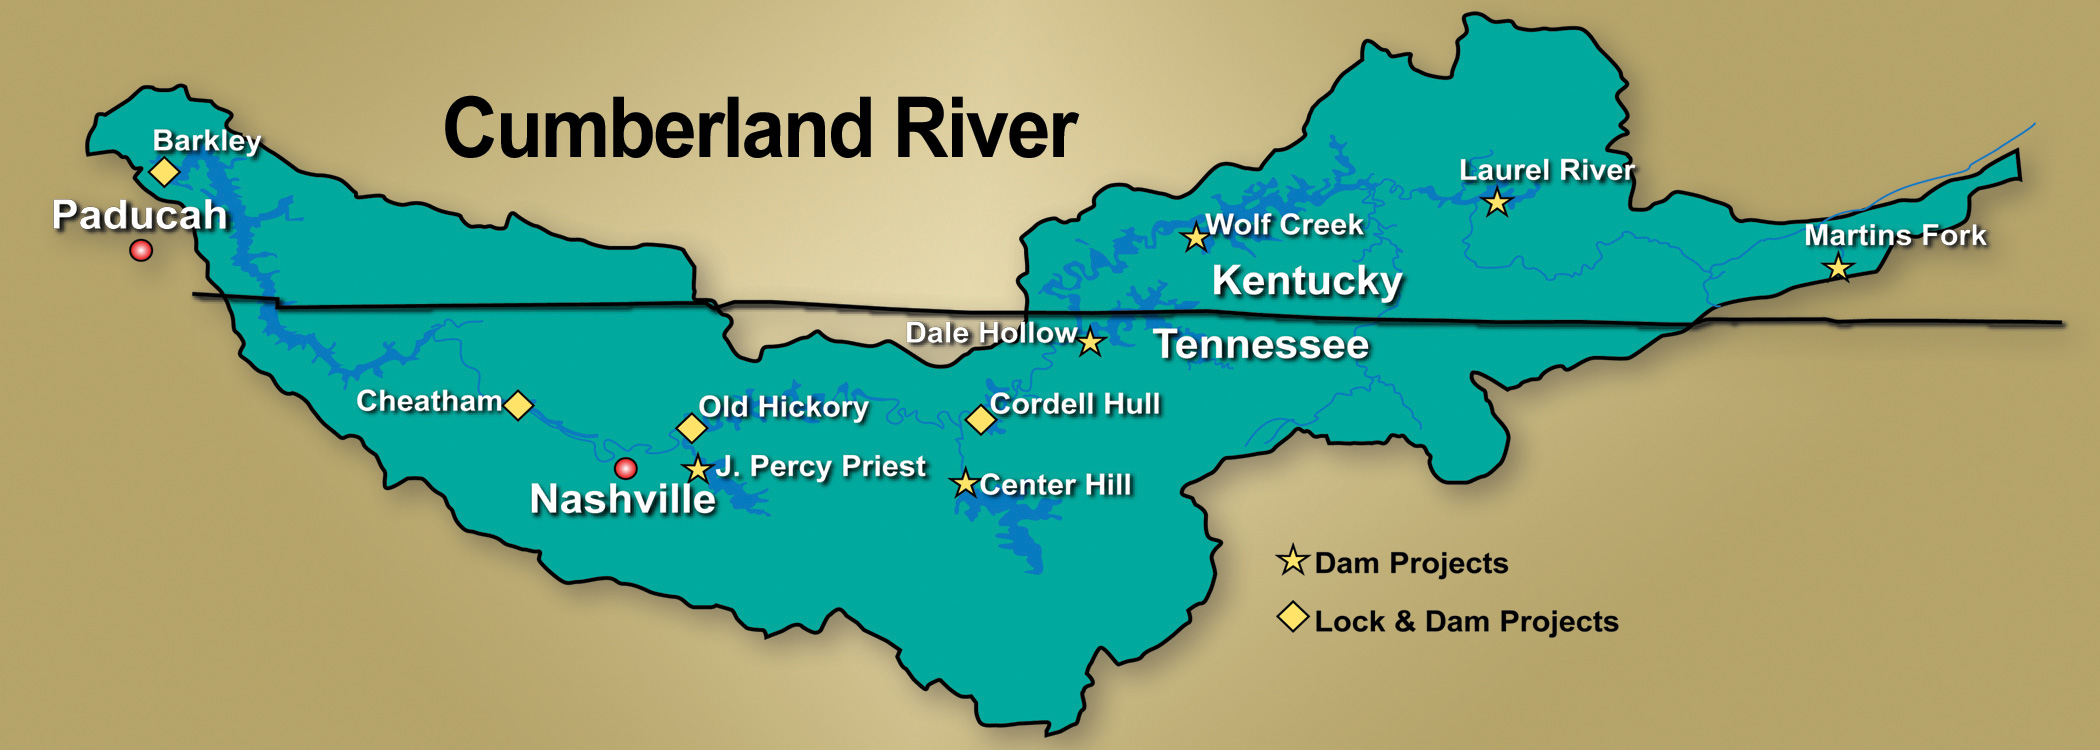 Cumberland River Basin Projects